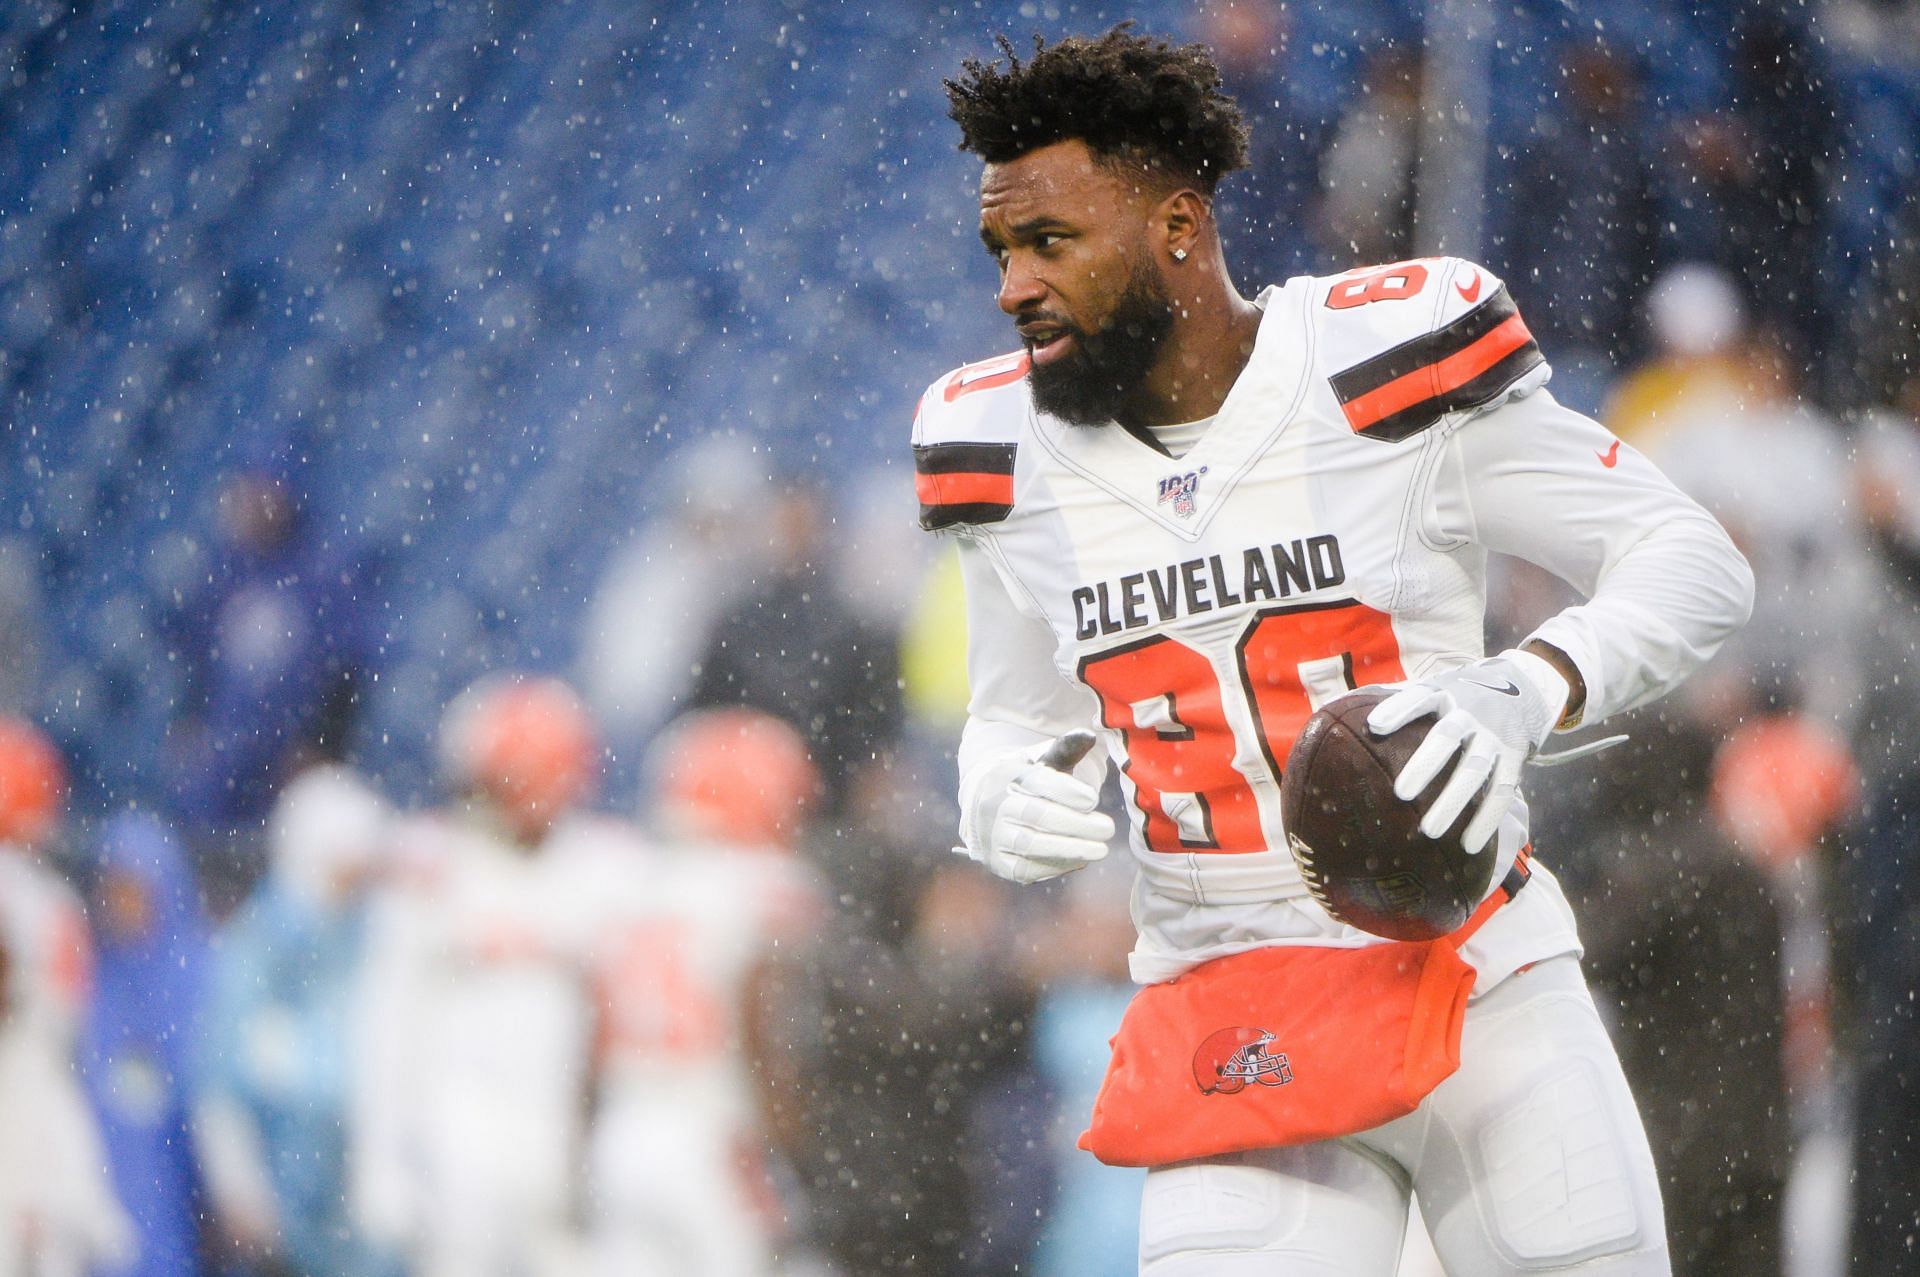 The Cleveland Browns are trying to pave the way for return of superstar Jarvis Landry.